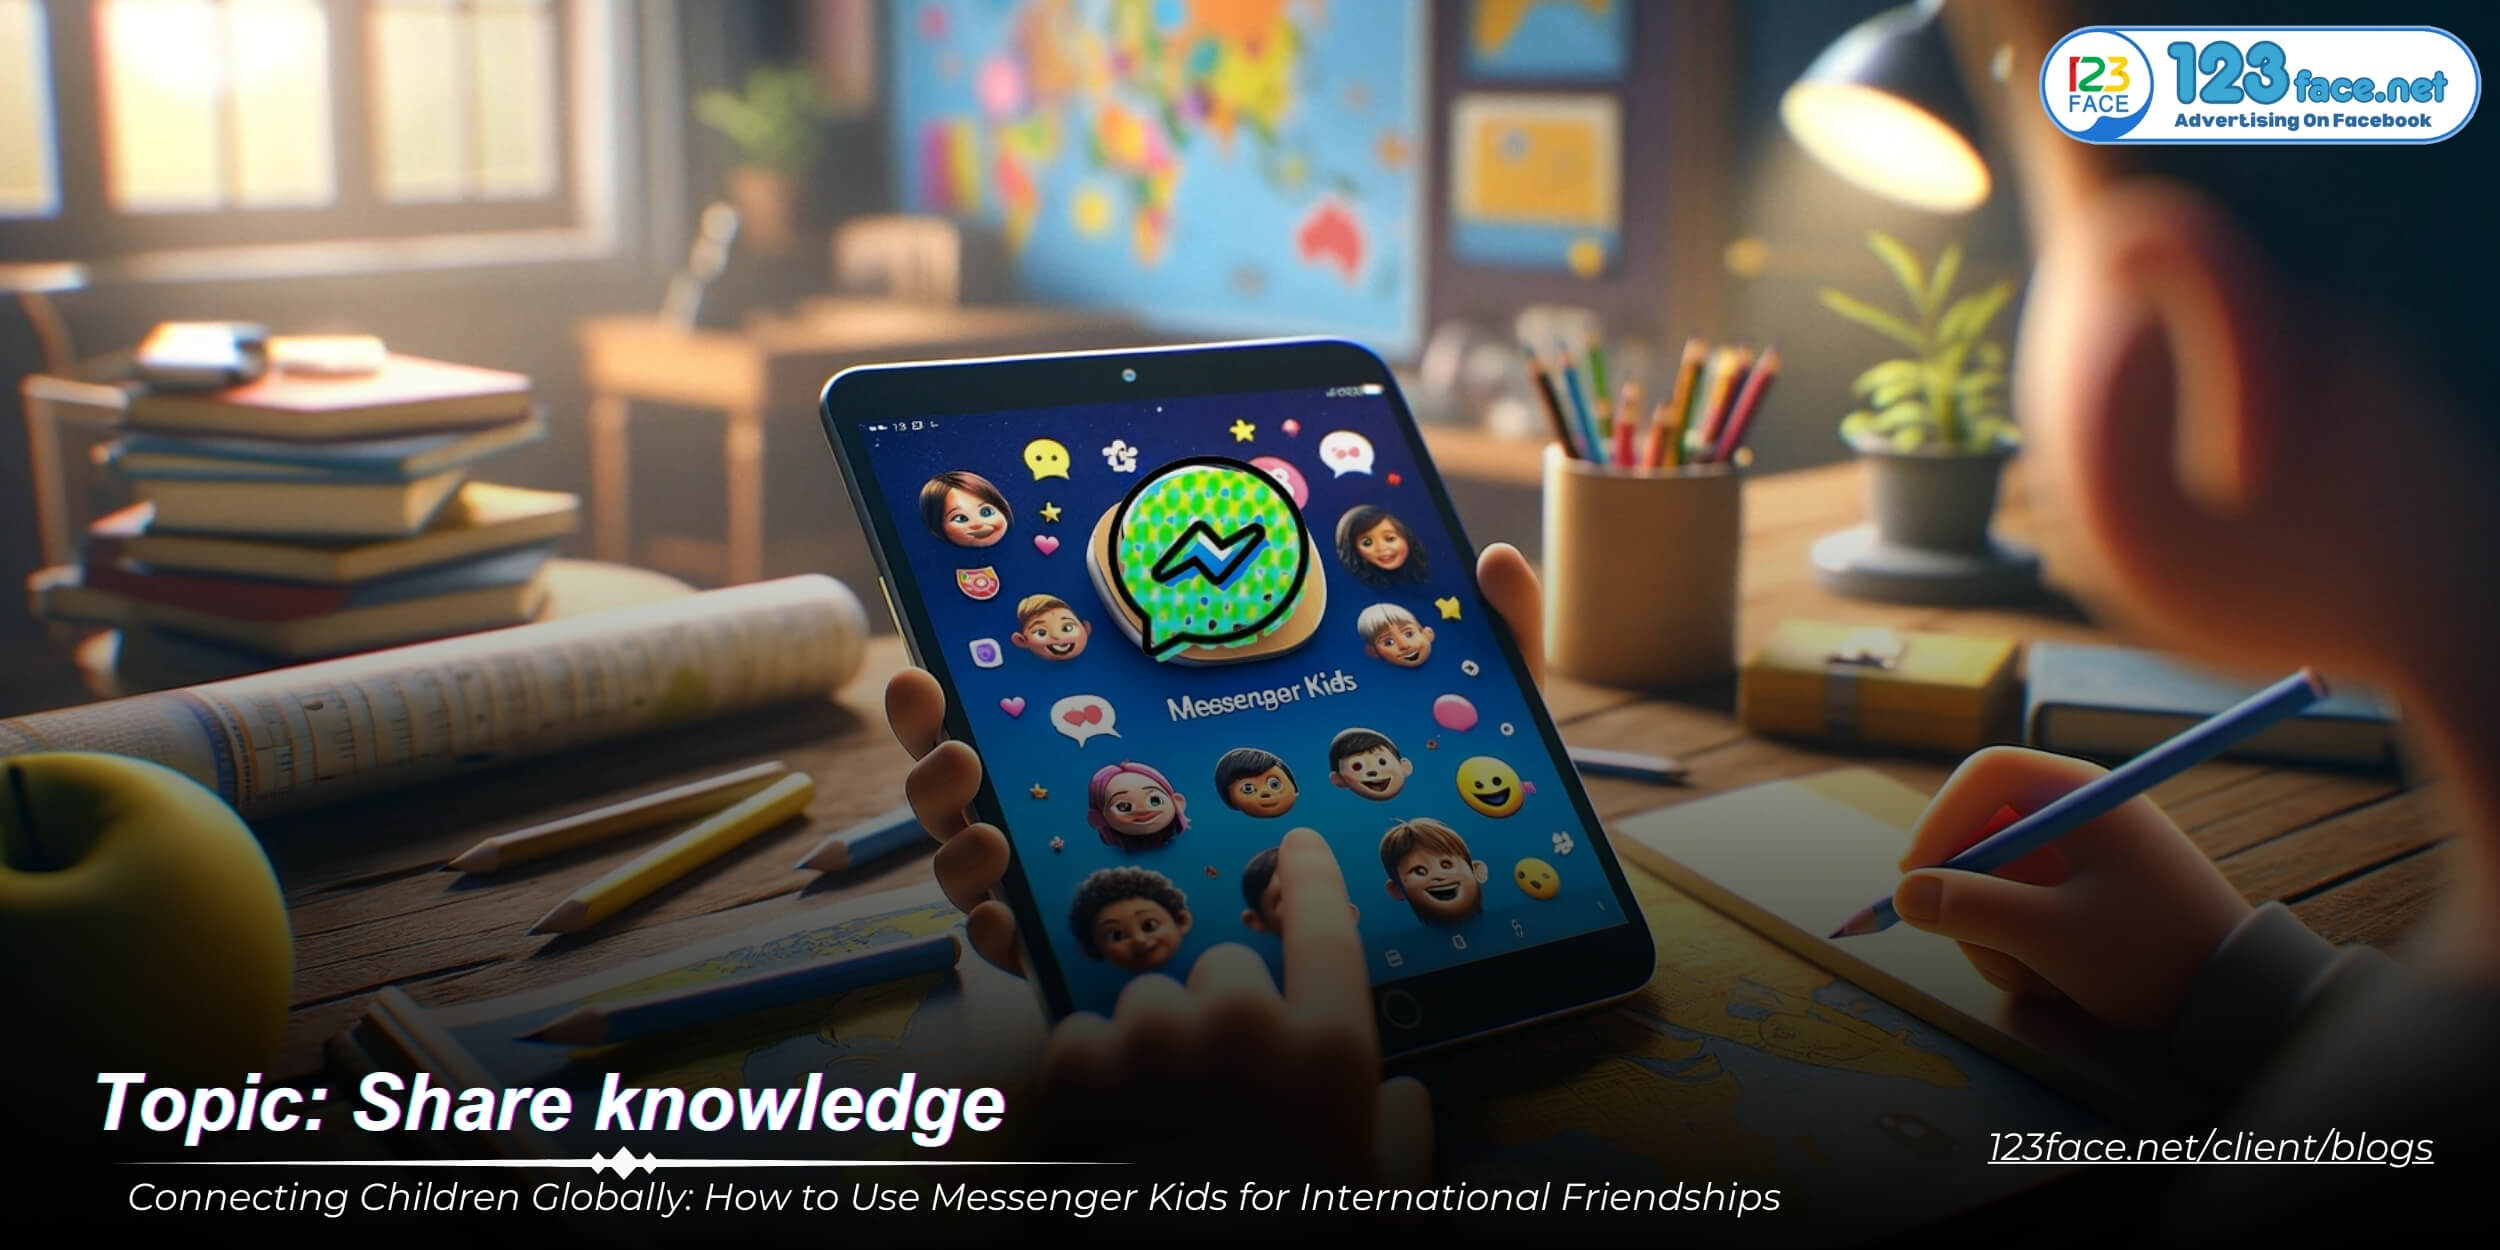 Connecting Children Globally: How to Use Messenger Kids for International Friendships